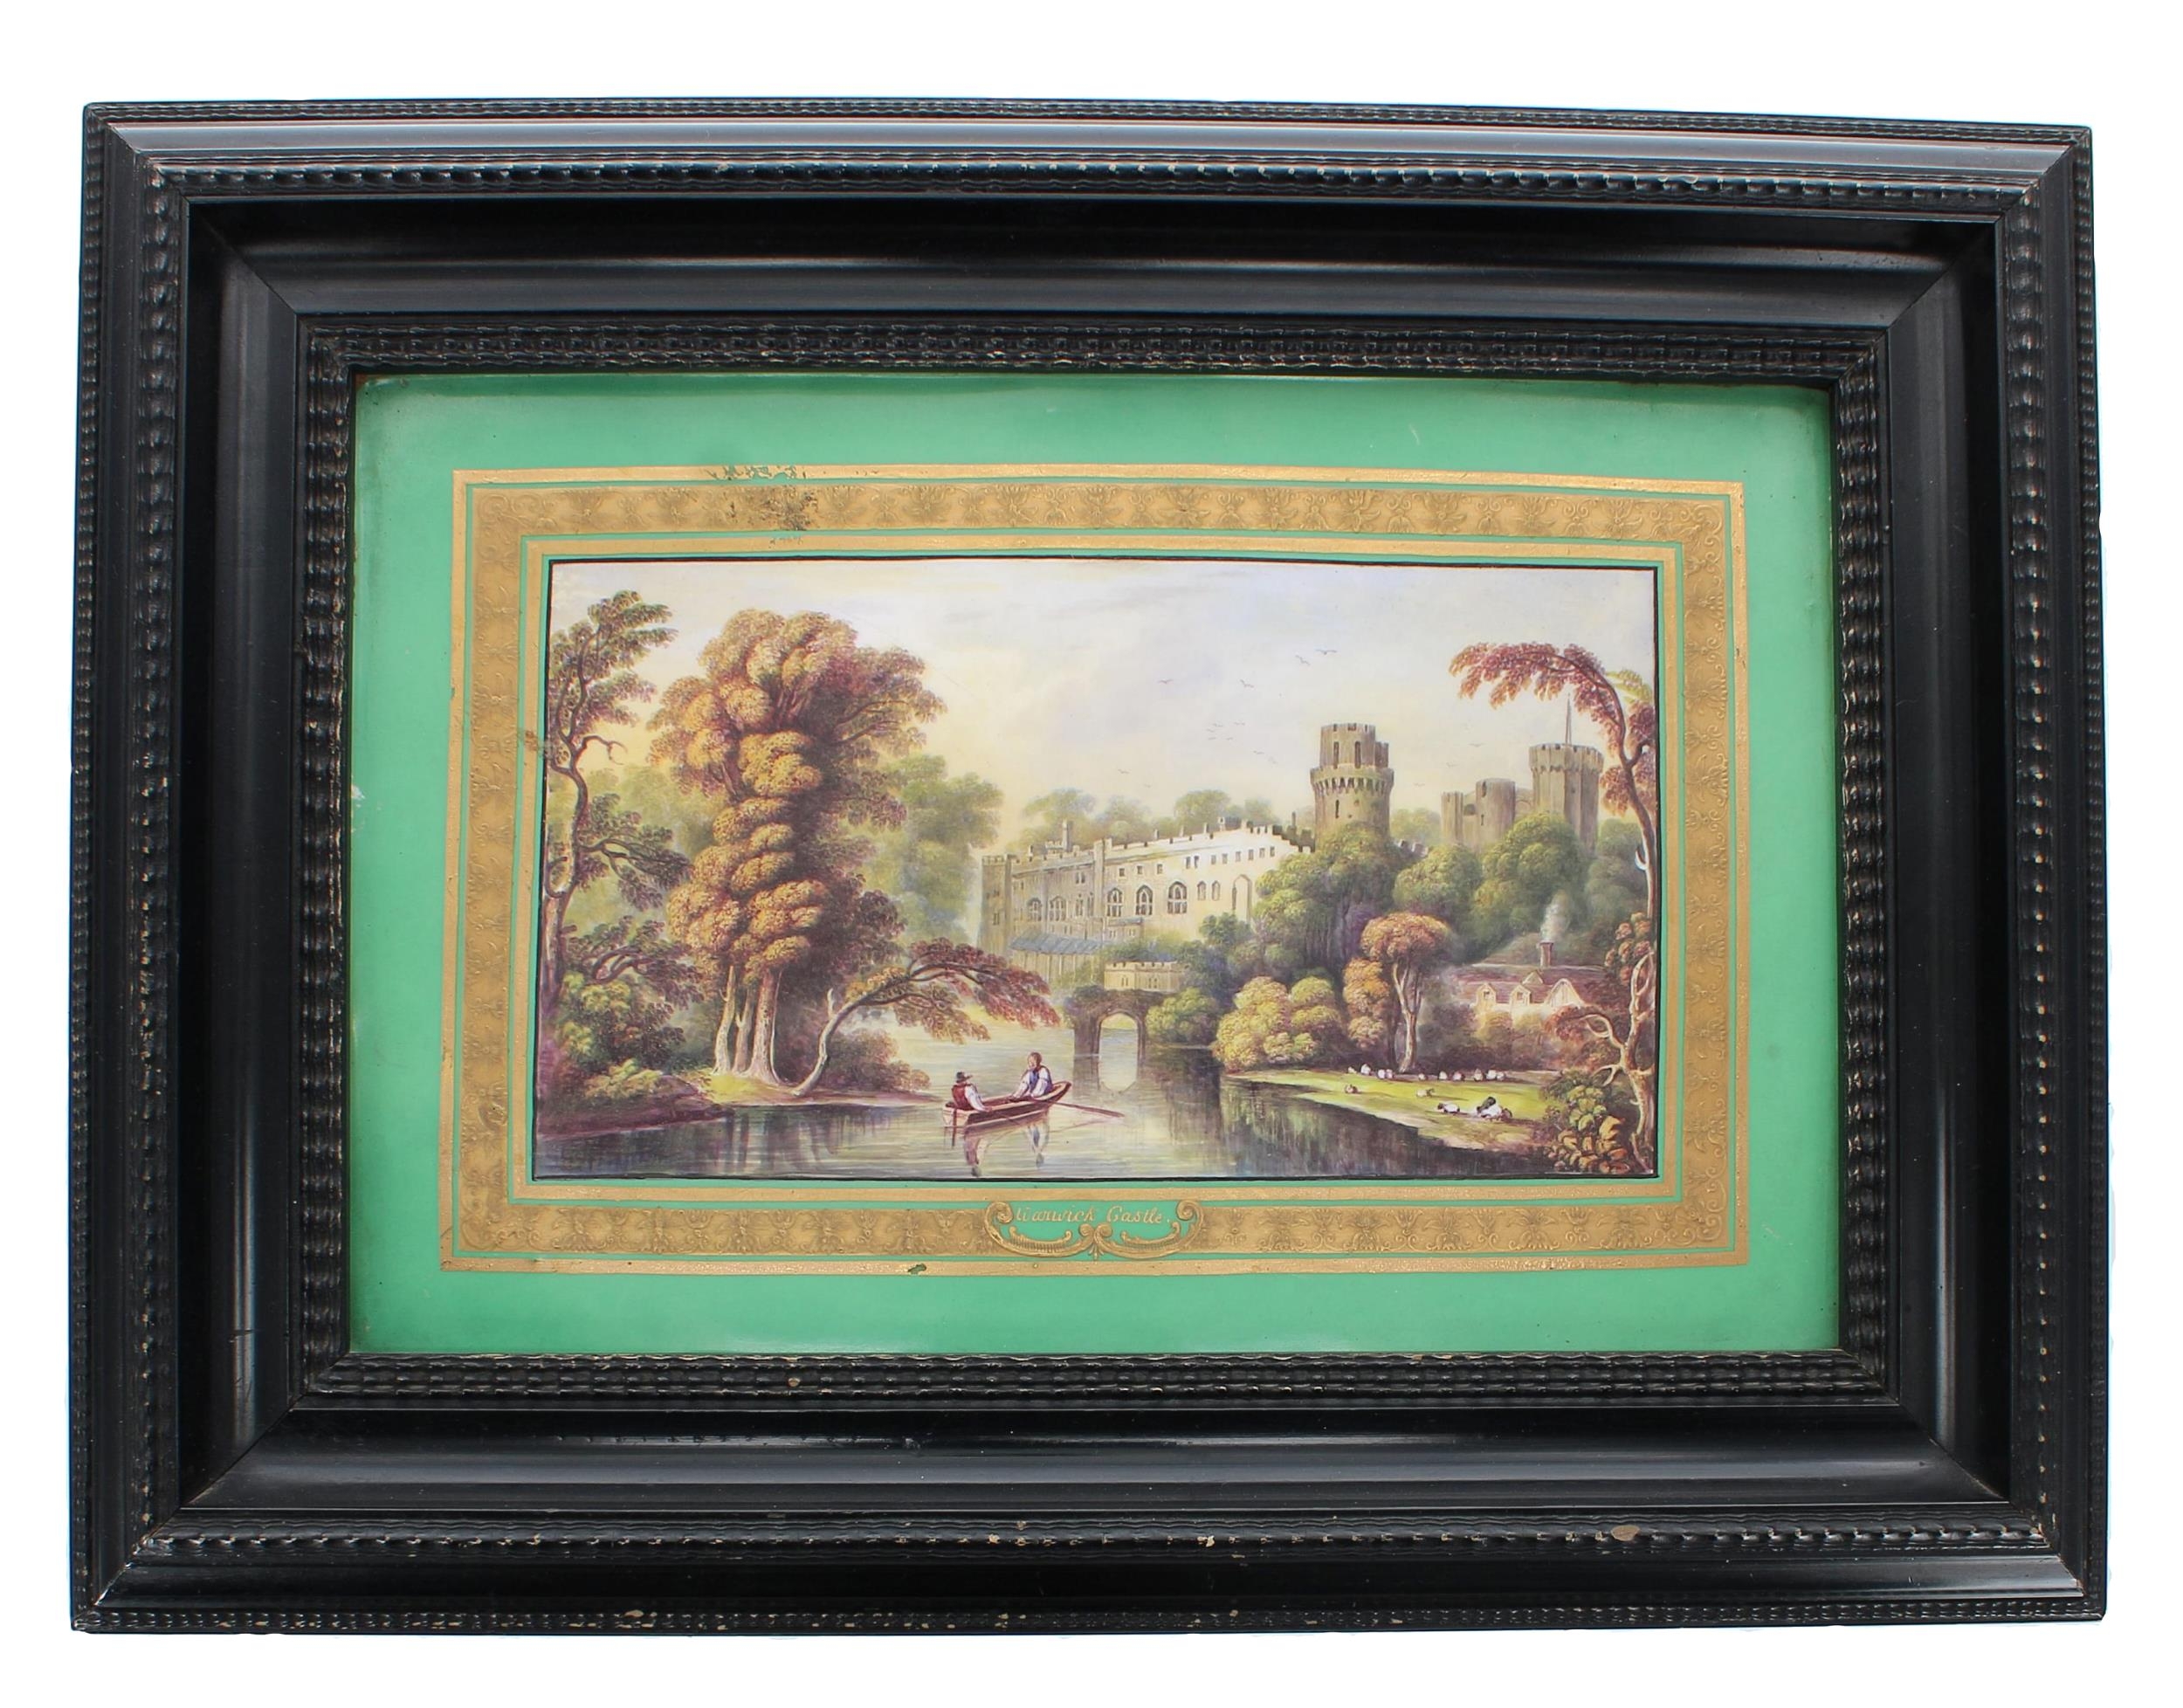 19th century English porcelain tray mounted within an ebonised frame, decorated with a title view of